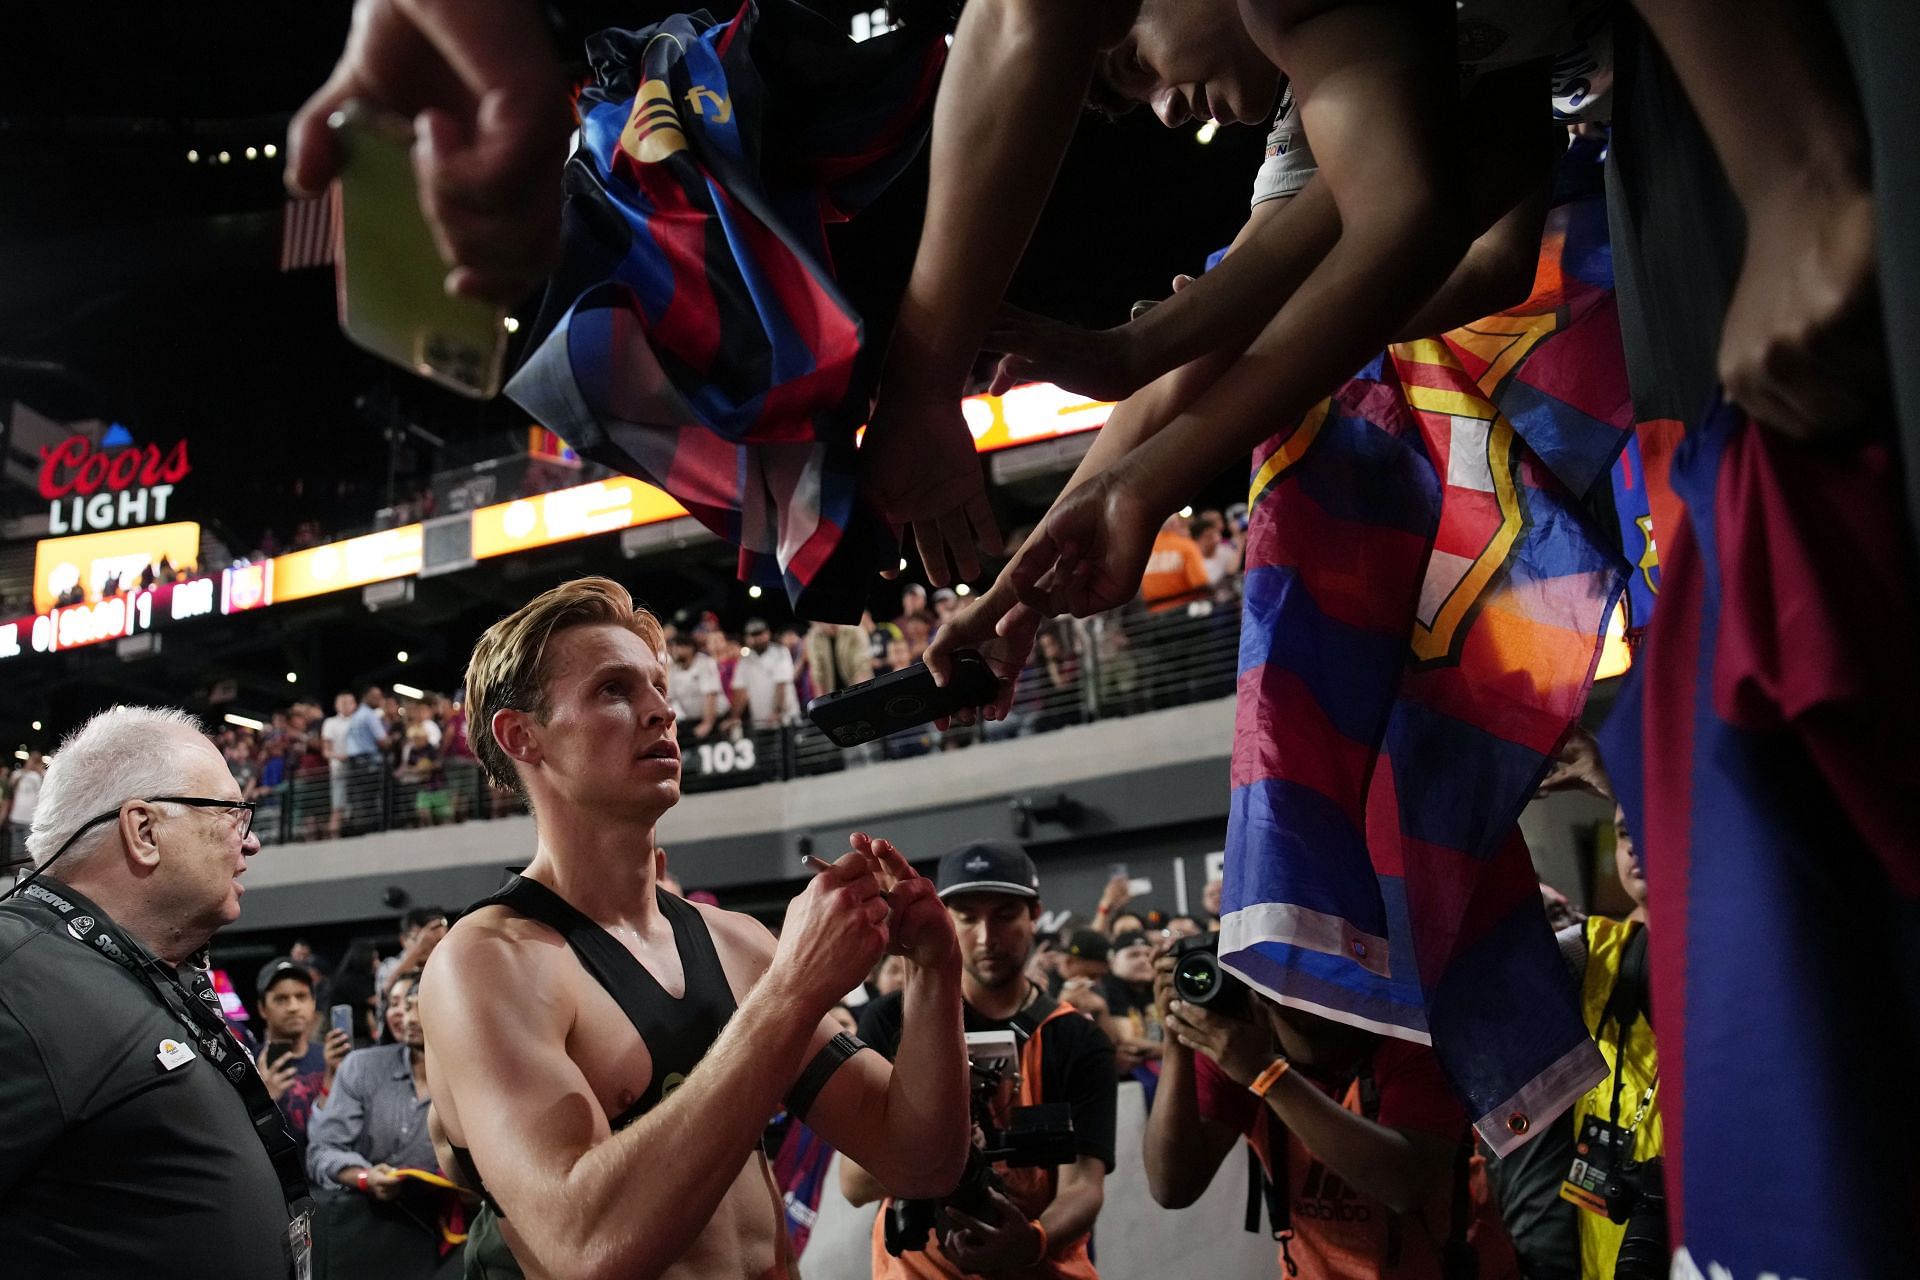 Frenkie de Jong is unlikely to leave the Camp Nou any time soon.